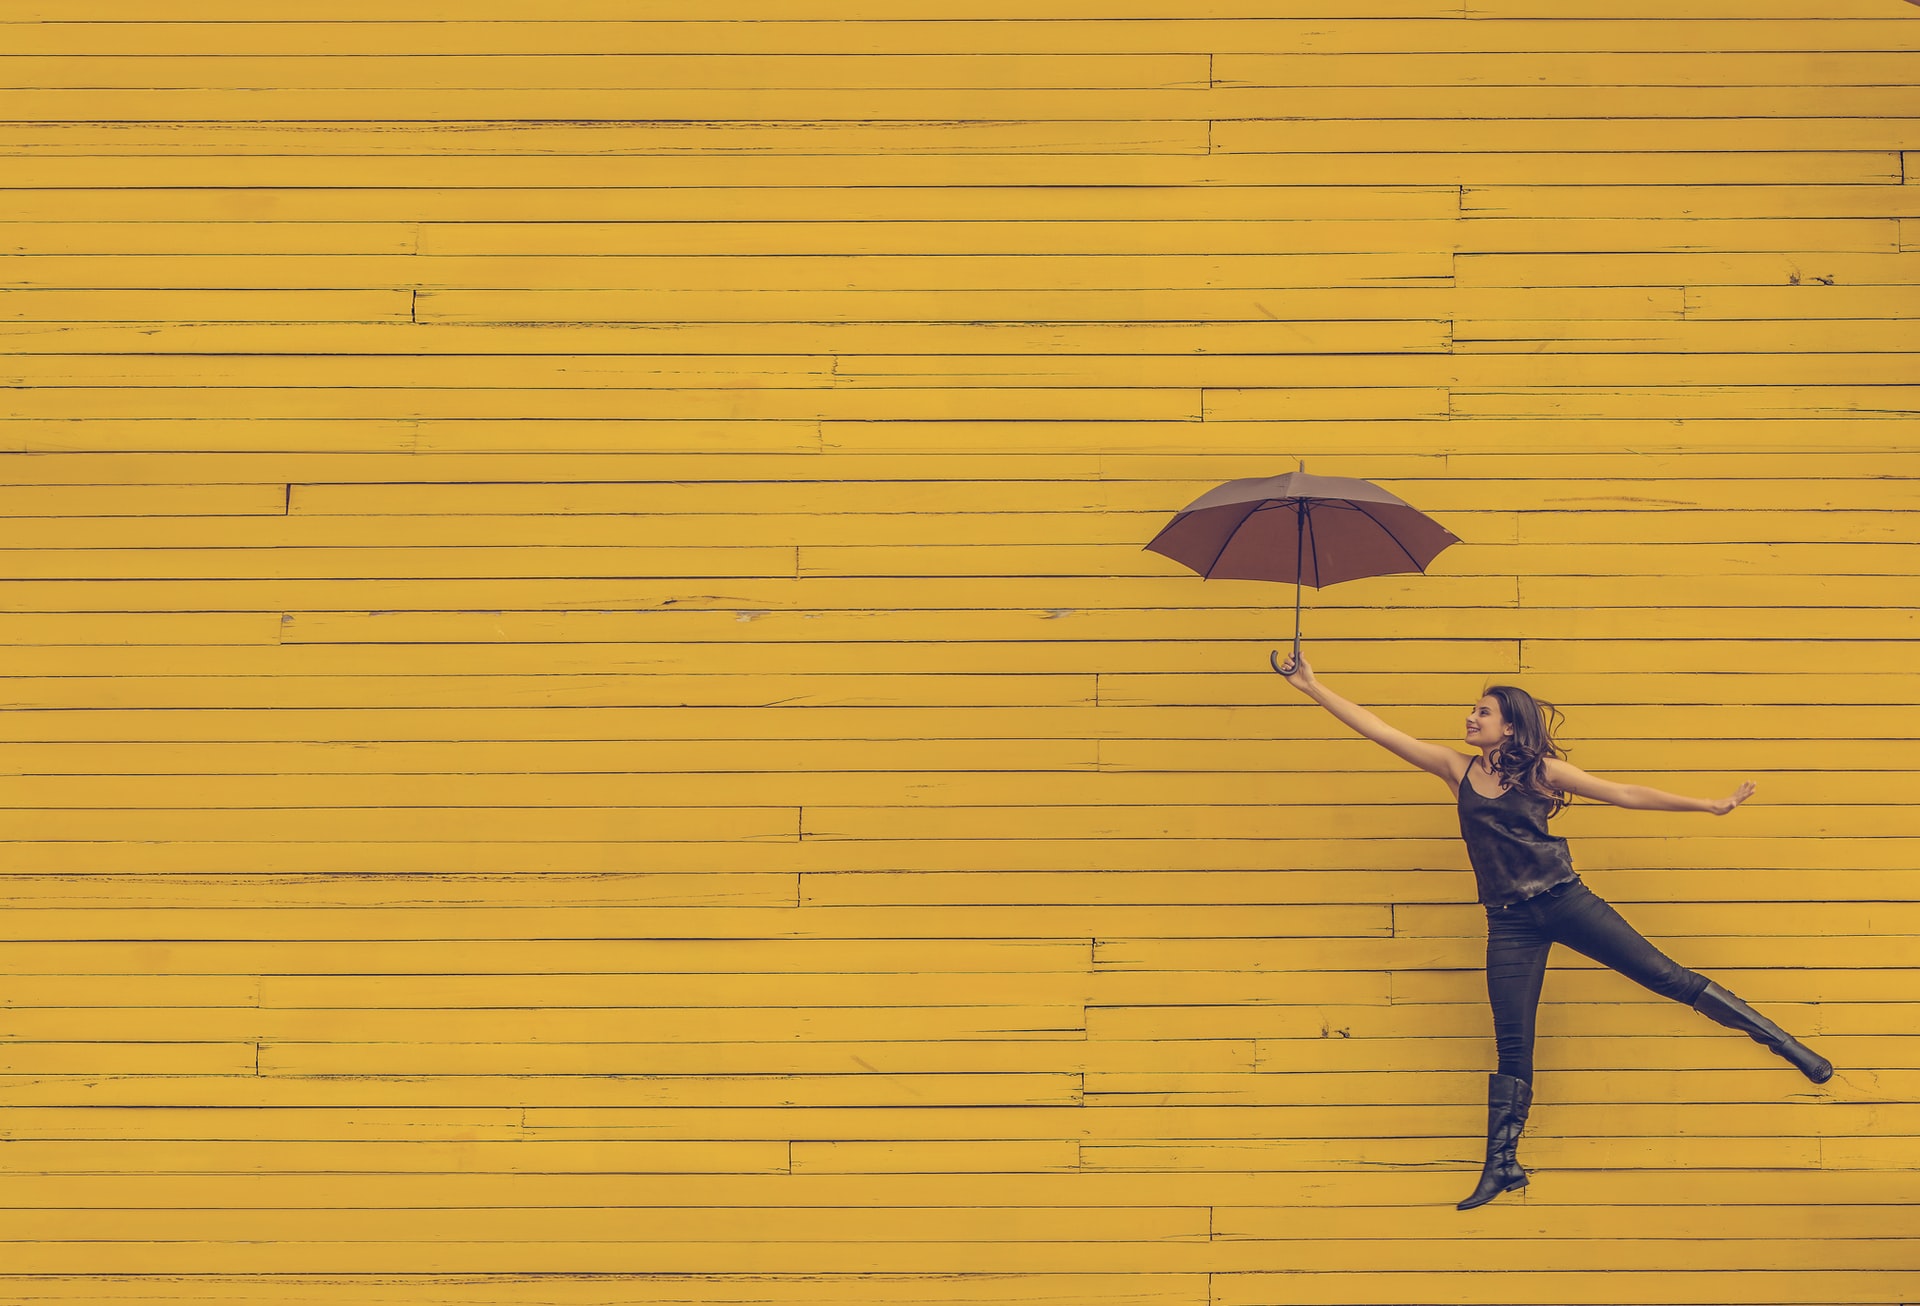 A person holding an umbrella jumps in front of a yellow brick wall